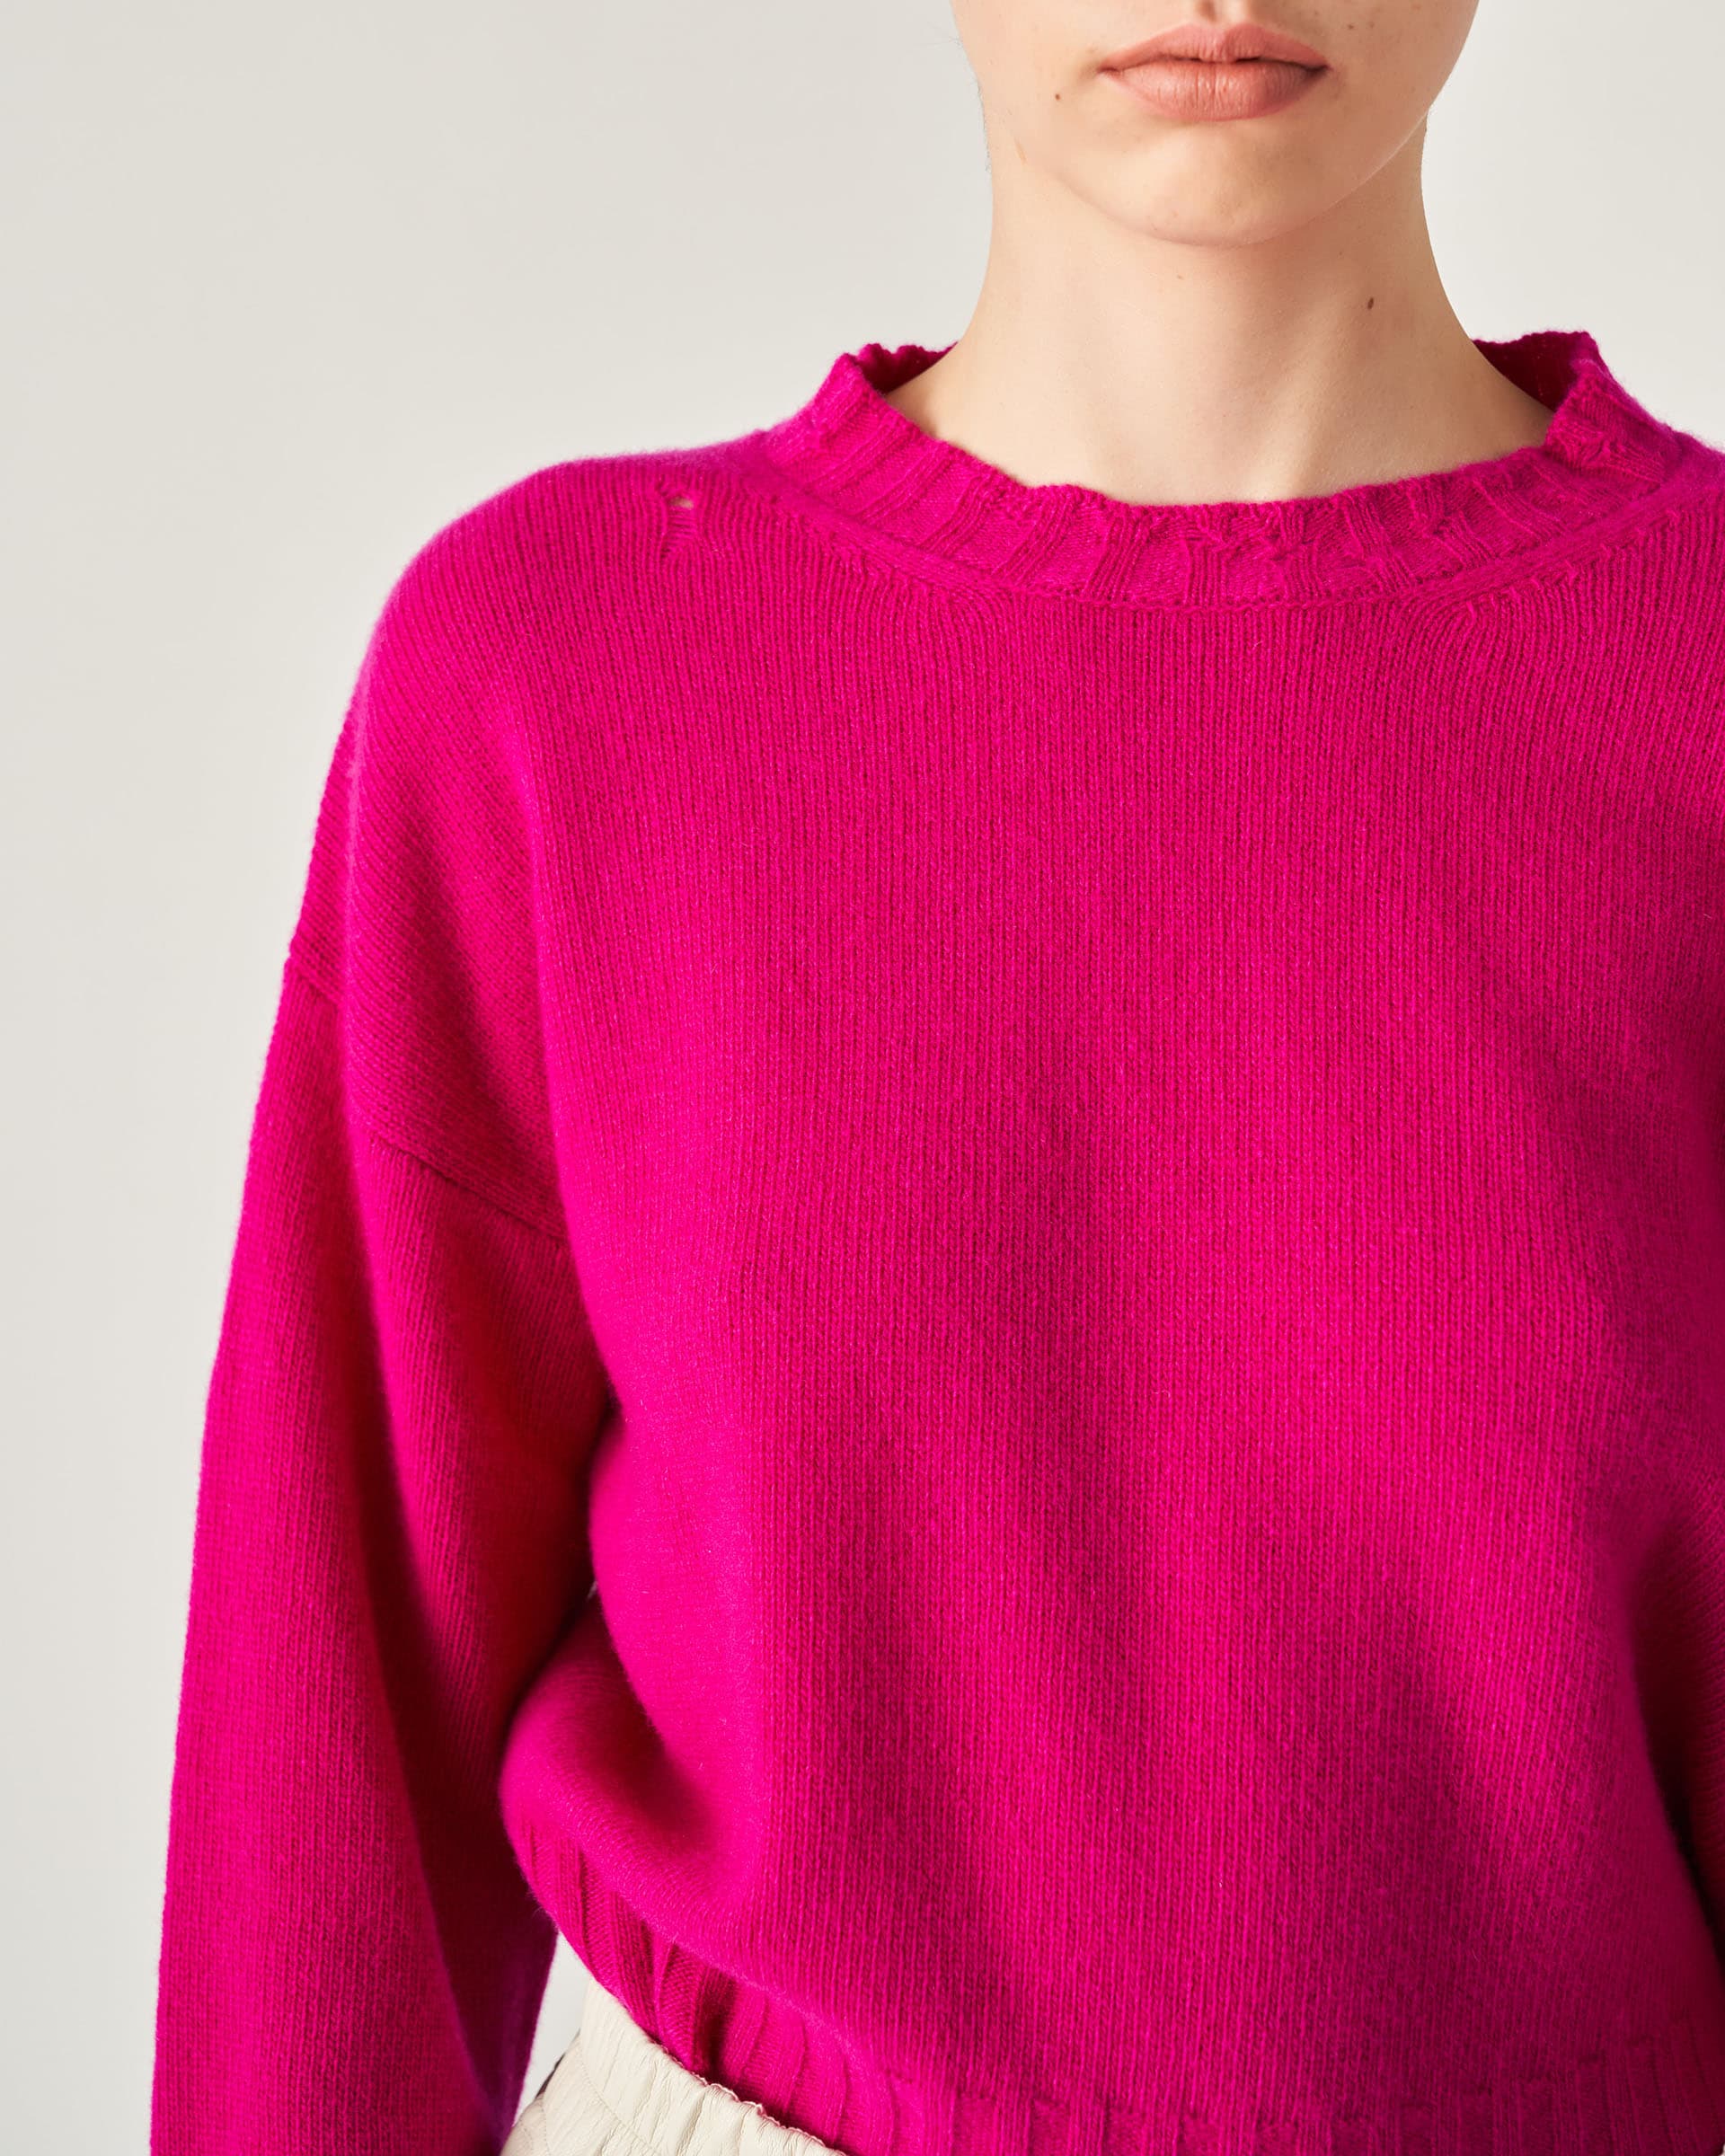 The Market Store | Crewneck Sweater With Breaks